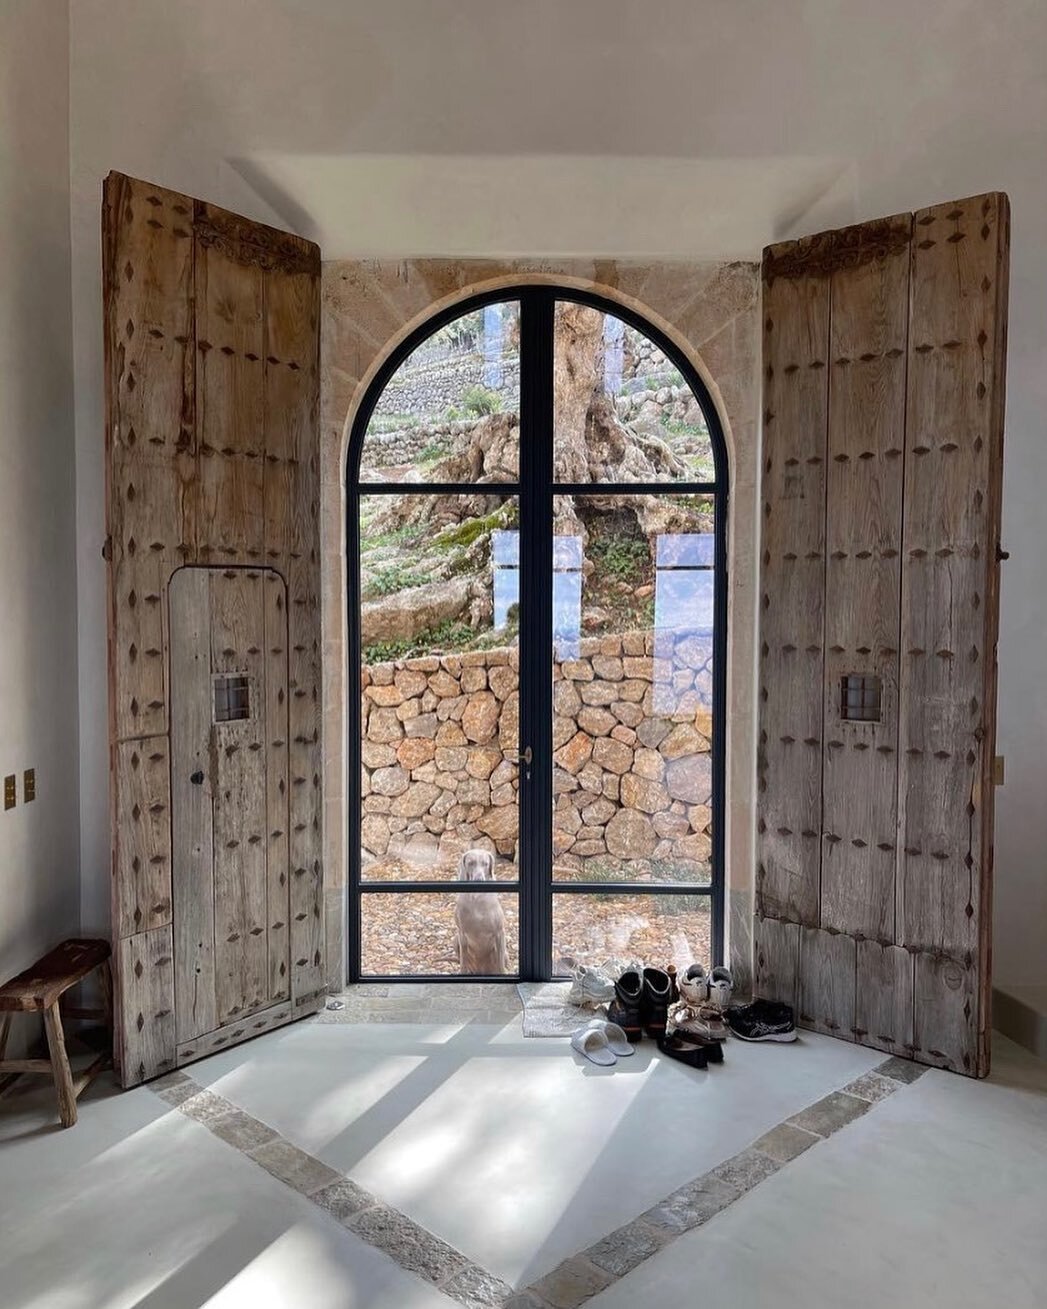 someone is waiting patiently to be let into this beautiful home in Mallorca by Moredesign
.
.
.
.
.
.
.
.
#moredesign #architect #architecture #home #mallorca #entrance #foyer #interiorarchitecture #design #kellybehunstudio @moredesign.es